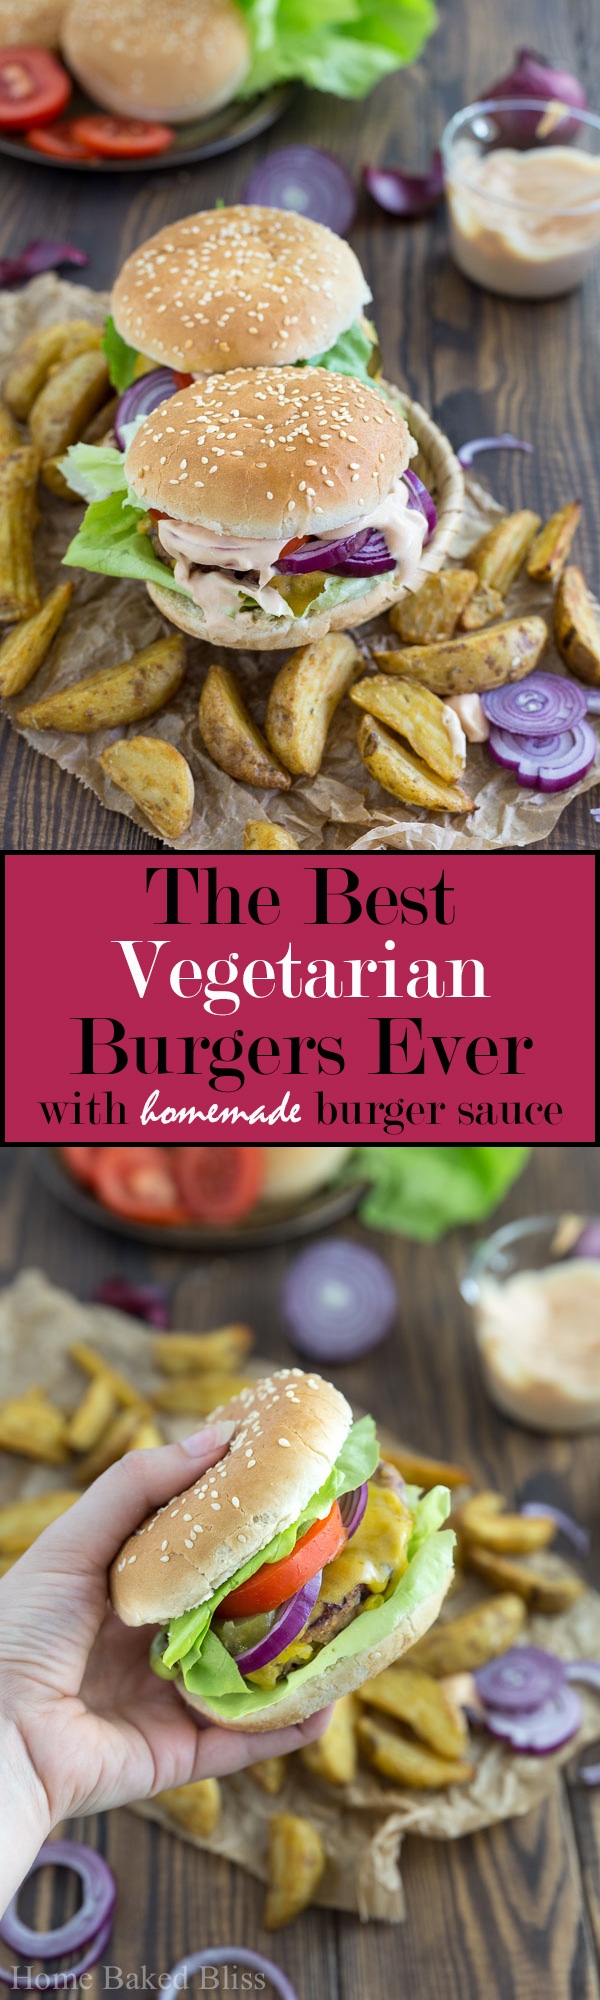 Incredibly flavourful vegetarian burgers with a vegan option too! Perfect for Father's Day, bbqs or summer parties.